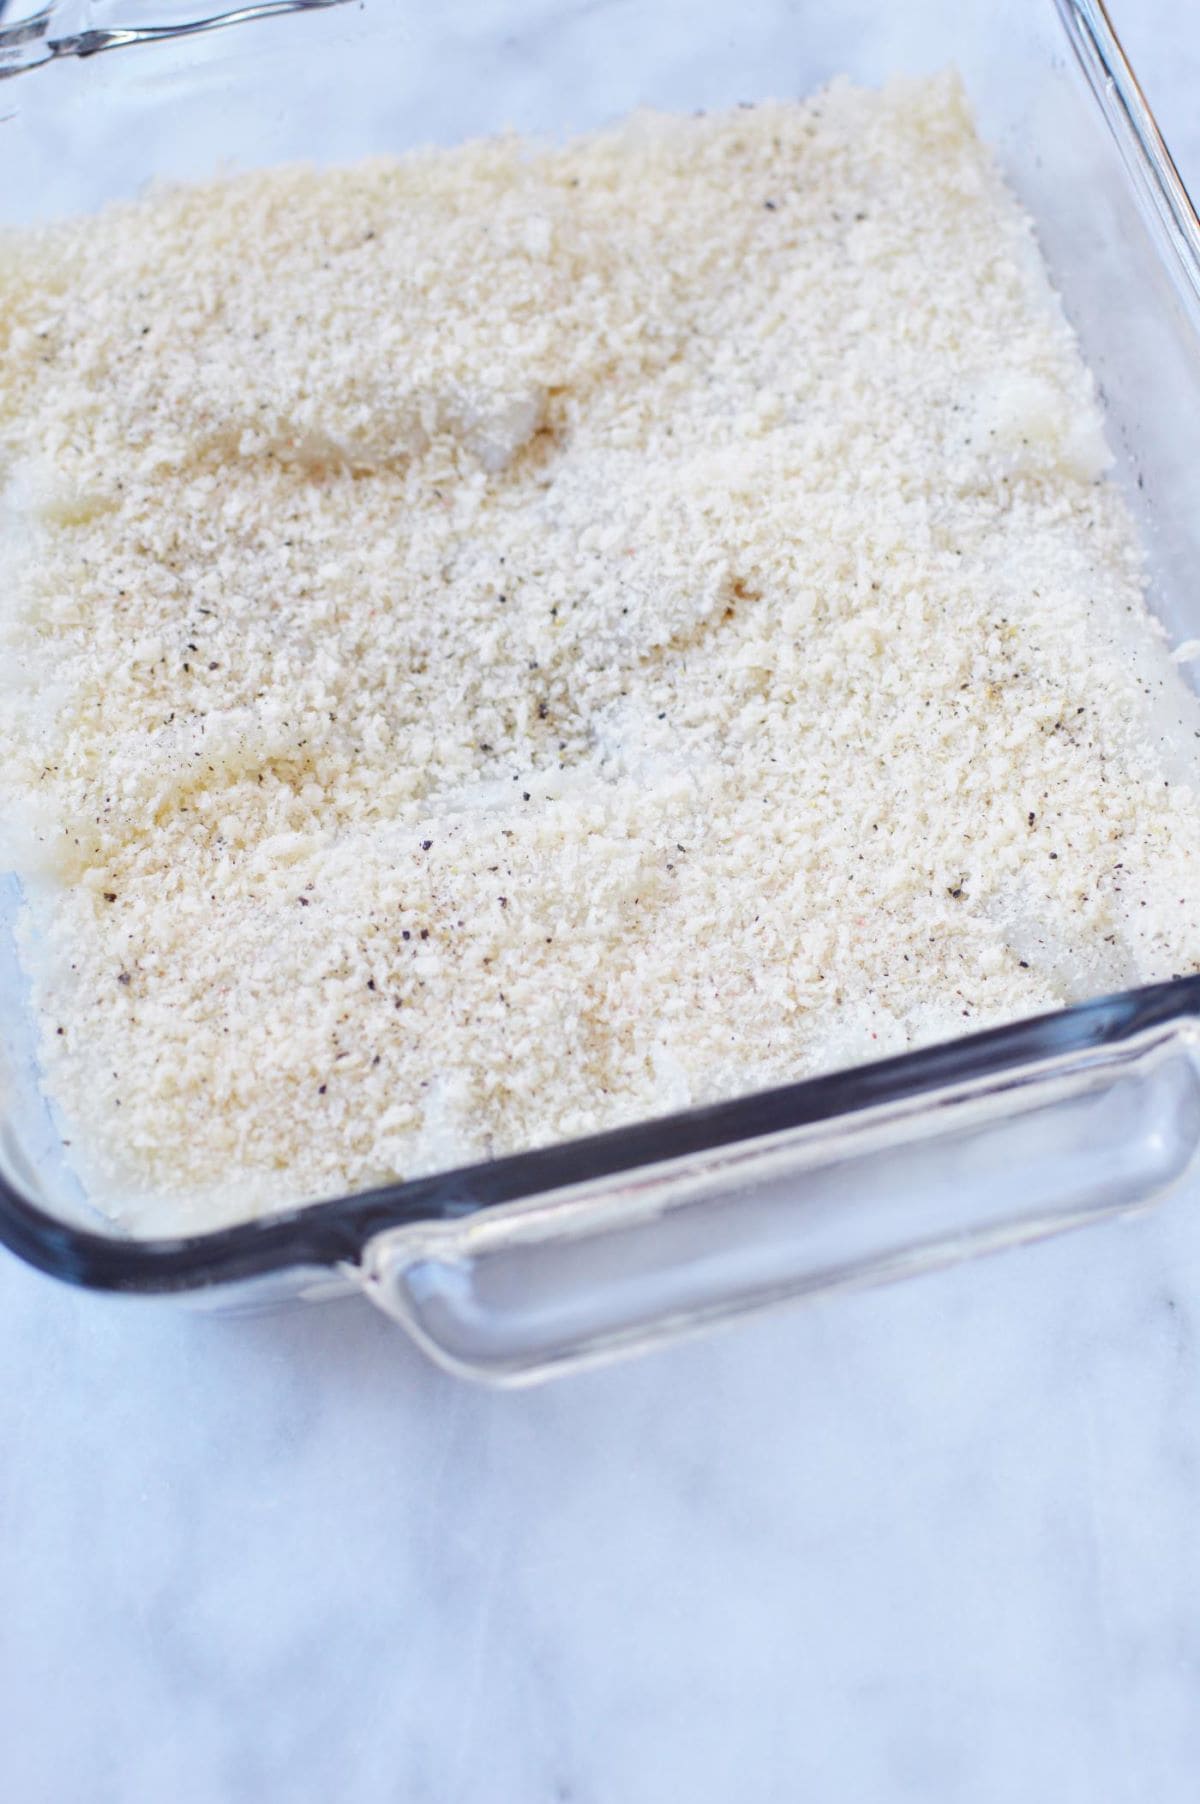 baking dish filled with breadcrumbs and fish fillets